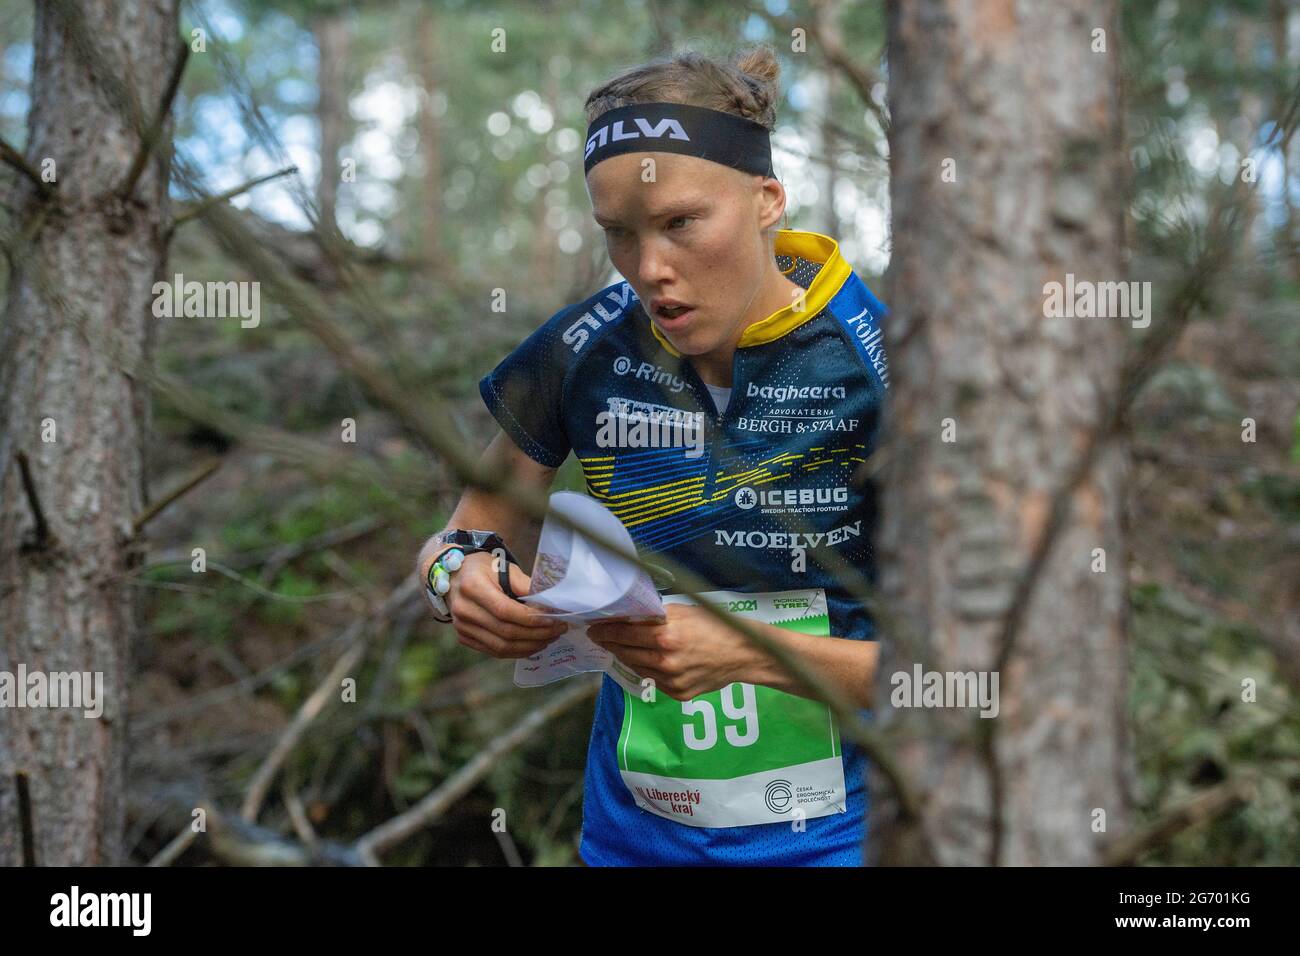 Hermanky, Czech Republic. 09th July, 2021. Tove Alexandersson of Sweden  competes during the long race at the World Orienteering Championships in  Hermanky, Ceska Lipa region, Czech Republic, July 9, 2021. Credit: Radek